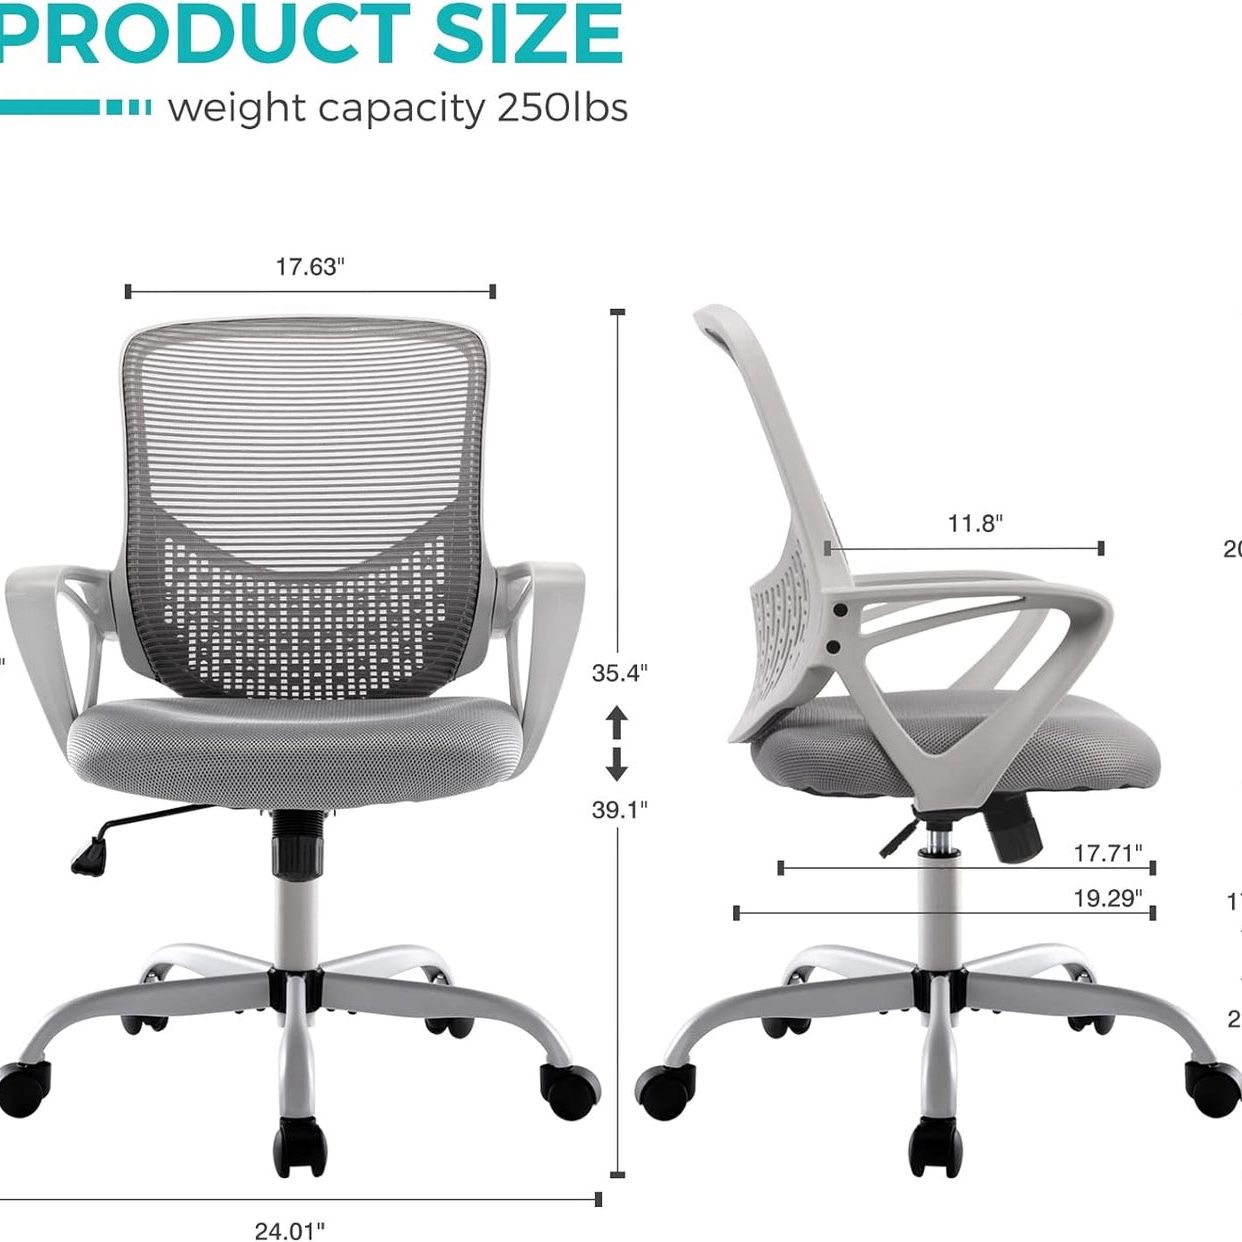 NEW - Ergonomic Office Chair Mesh Back Office Desk Chair Computer Chair Mid Back Task Chair for Home Office Gaming - Retail $79